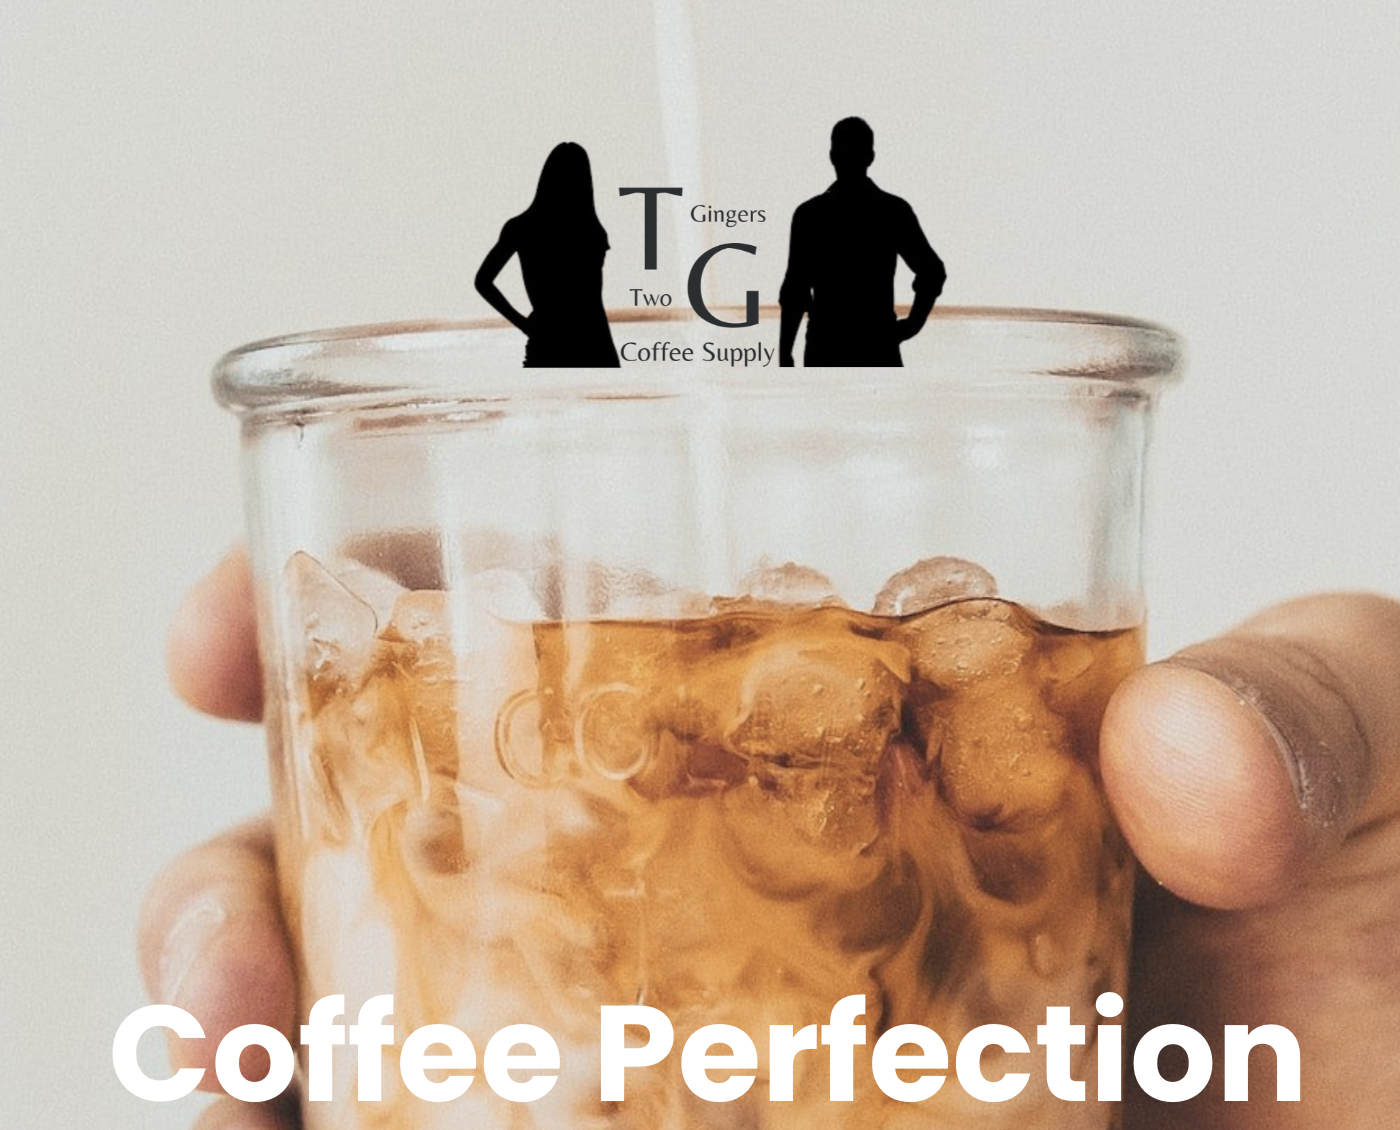  Highest Quality Complete Commercial Coffee Supply Located in Central FL Call or Email us to Schedule a Meeting with our Incredible Commercial Accounts Team! 